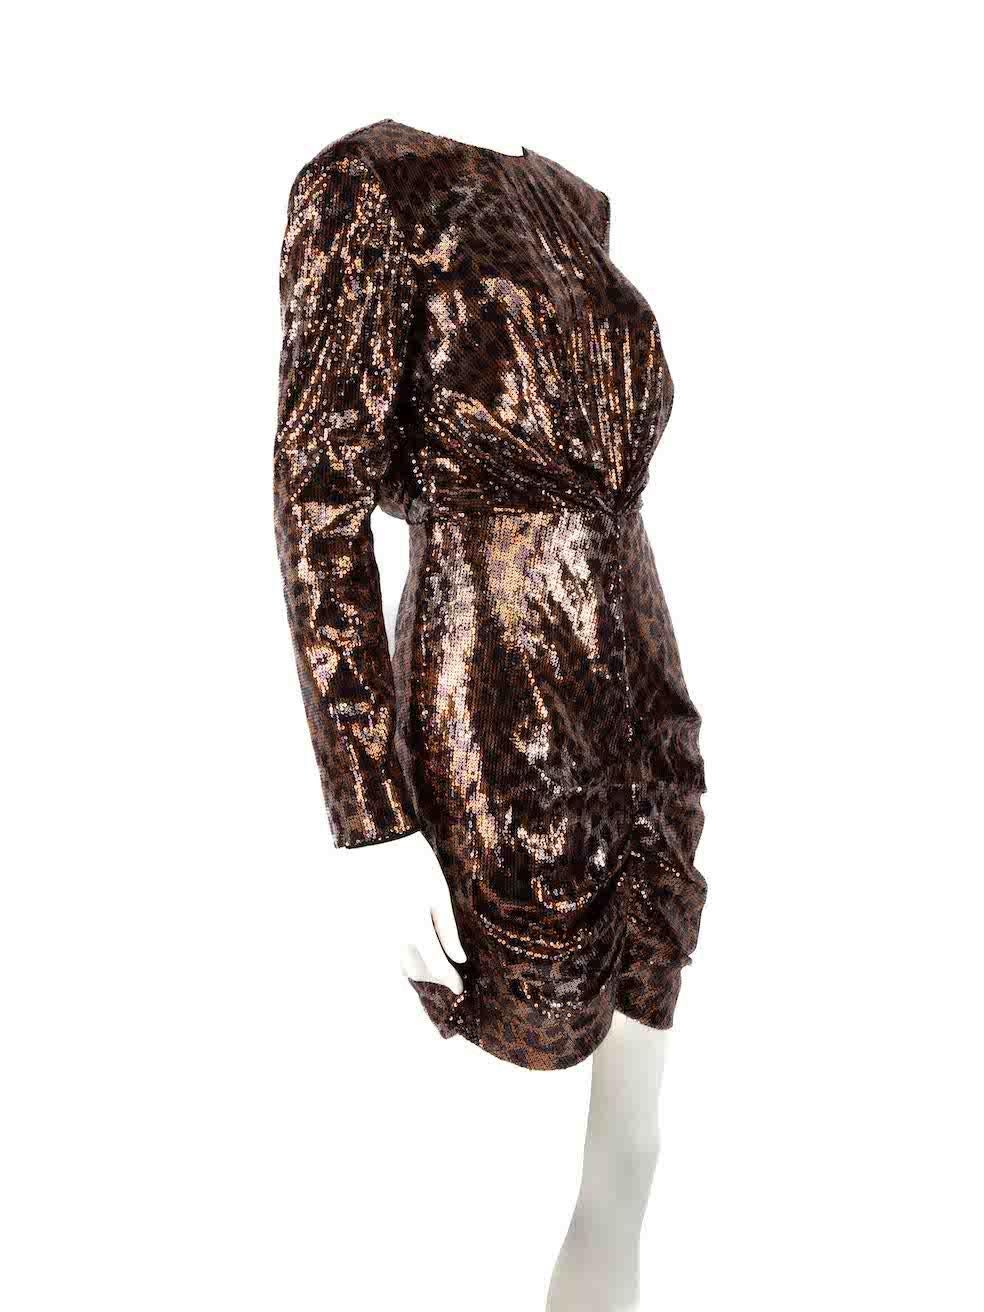 CONDITION is Very good. Hardly any visible wear to dress is evident on this used MSGM designer resale item.
 
 
 
 Details
 
 
 Brown
 
 Polyester
 
 Dress
 
 Sequin leopard print
 
 Long sleeves
 
 Round neck
 
 Mini
 
 Ruched detail
 
 Back zip